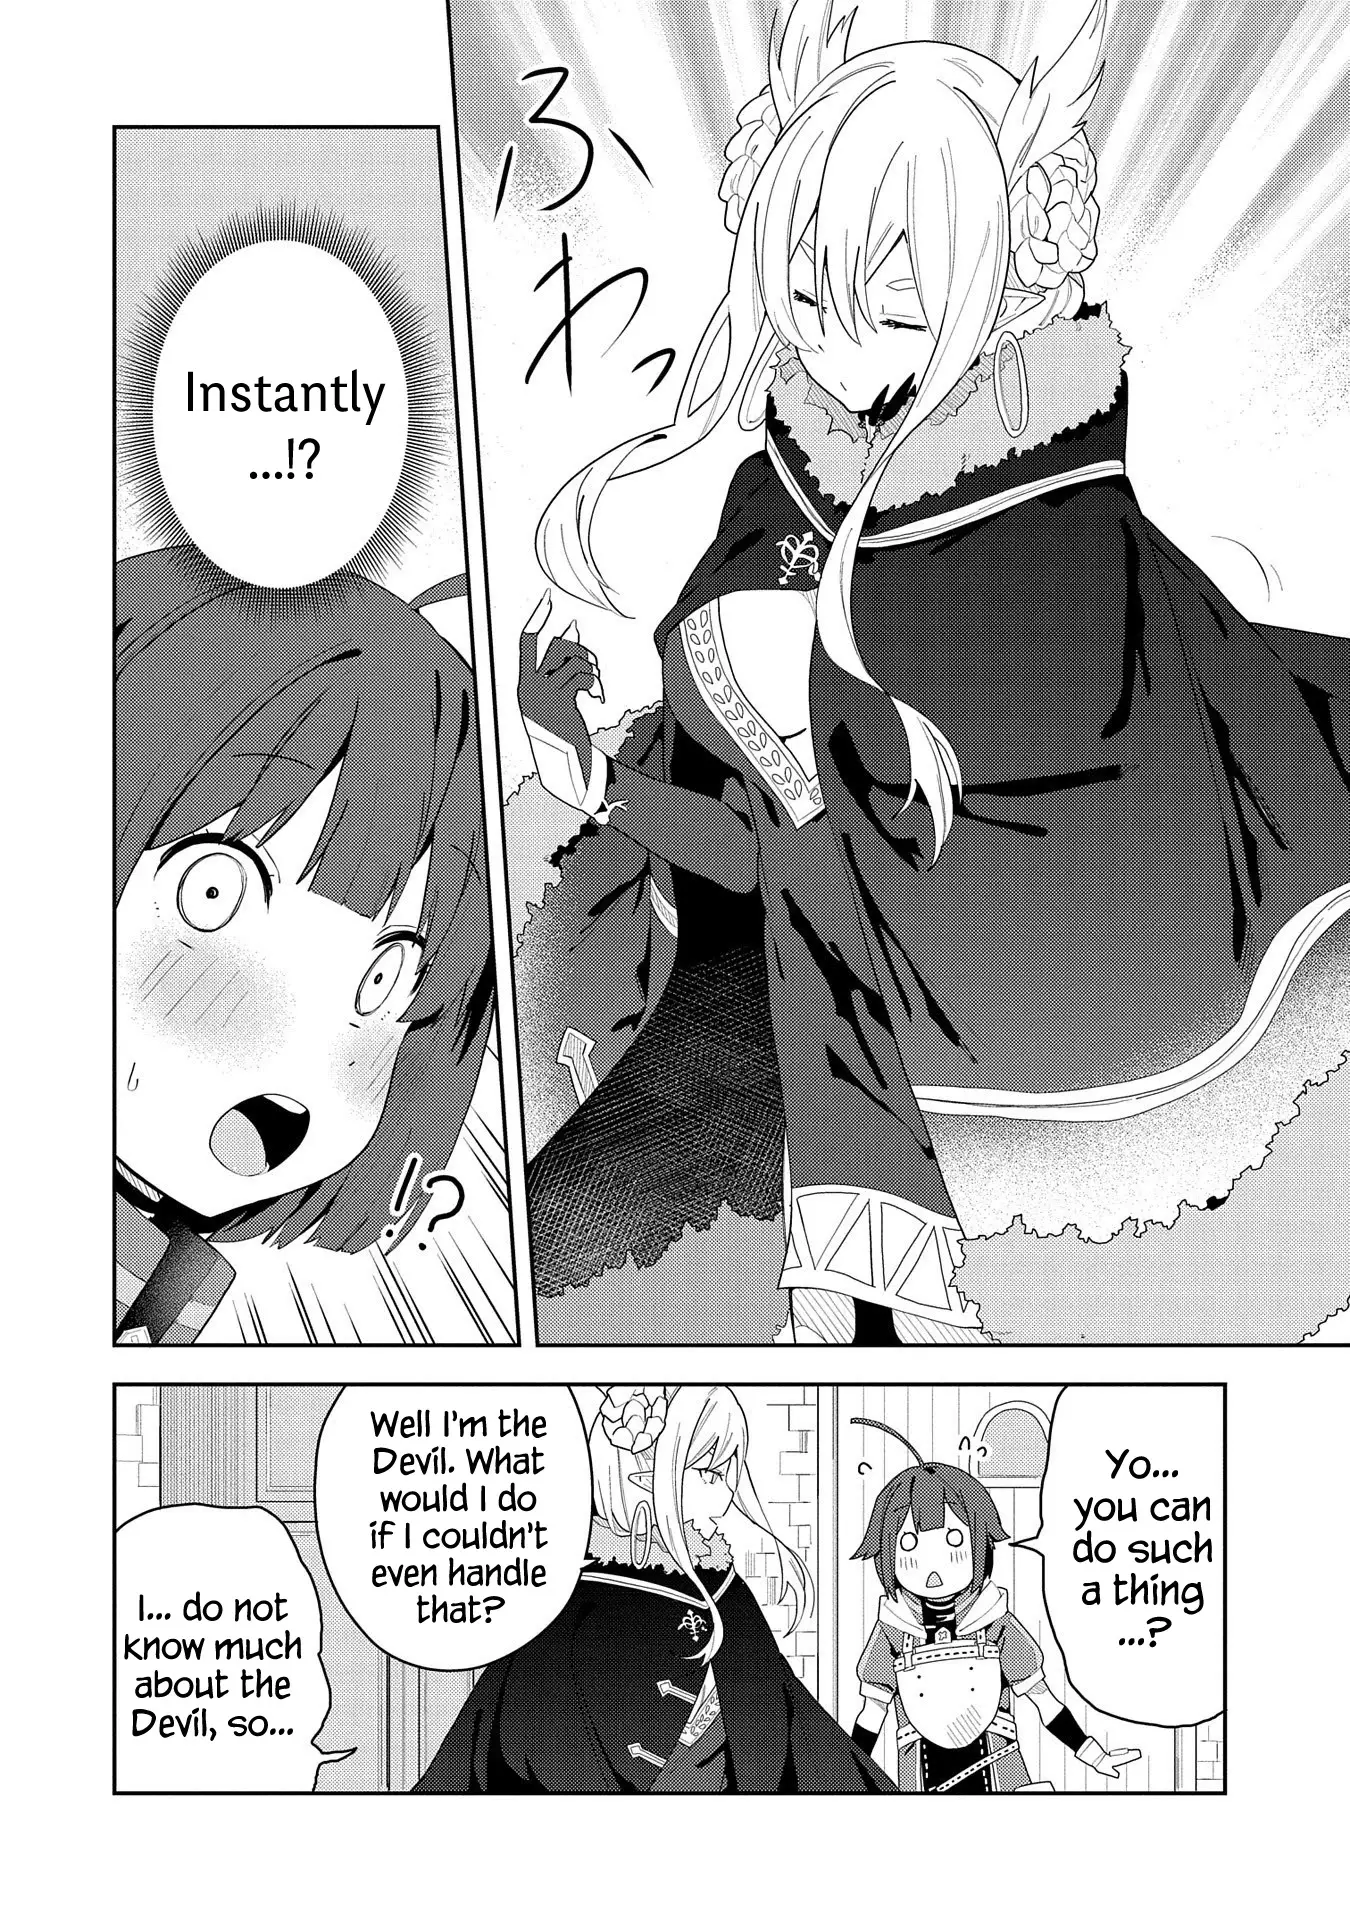 I Summoned The Devil To Grant Me A Wish, But I Married Her Instead Since She Was Adorable ~My New Devil Wife~ - 2 page 20